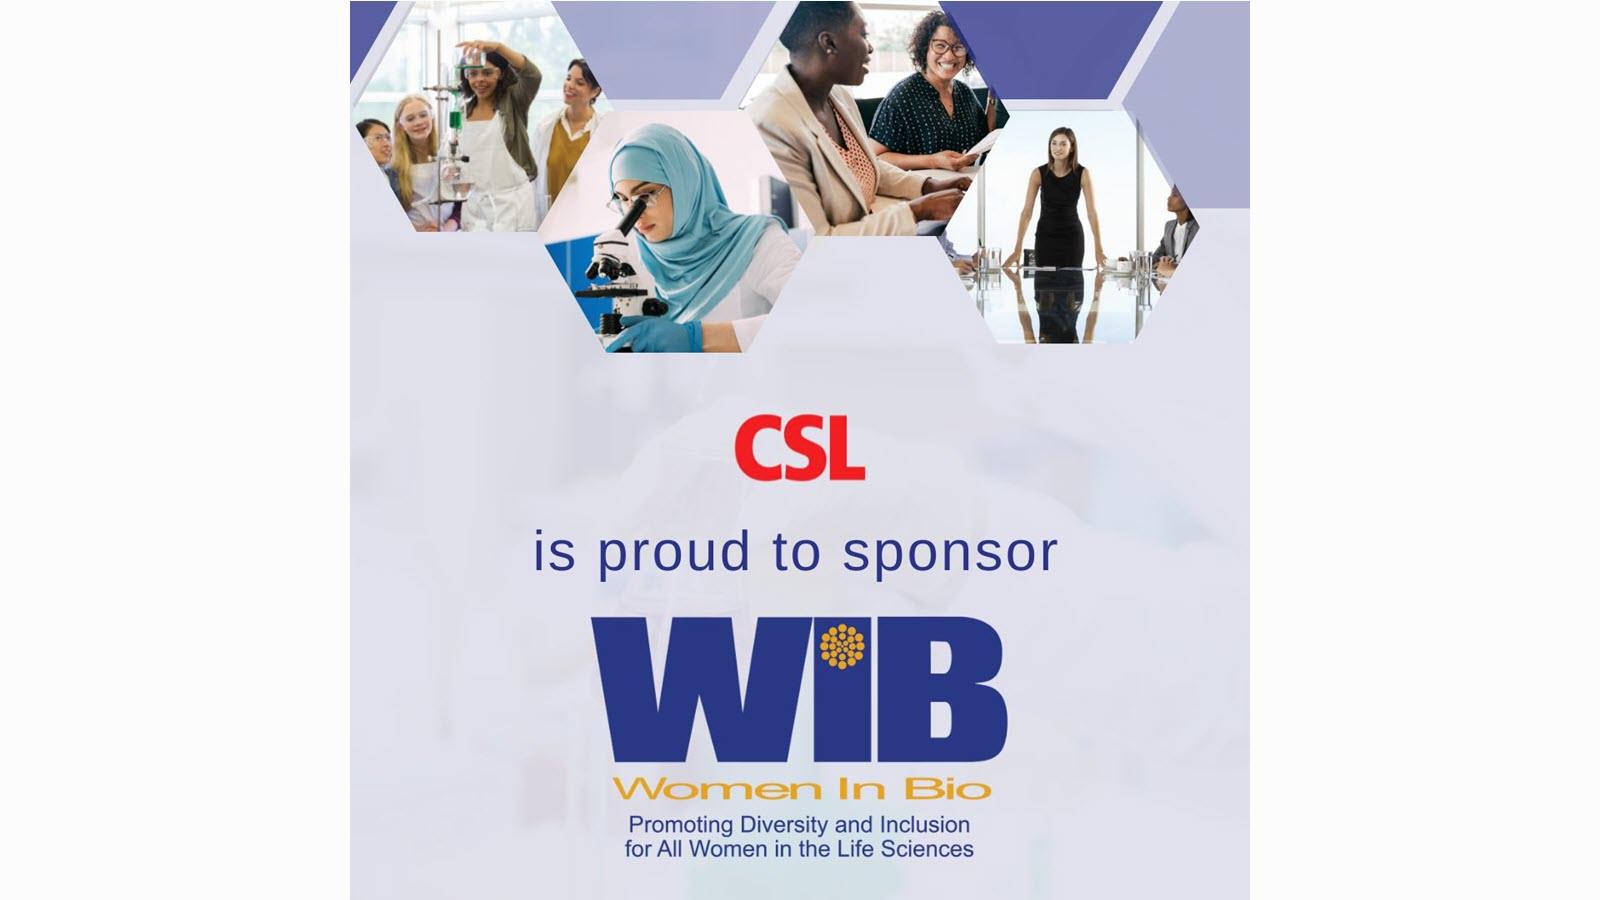 CSL is proud to sponsor Women in Bio with images of women working in biotech